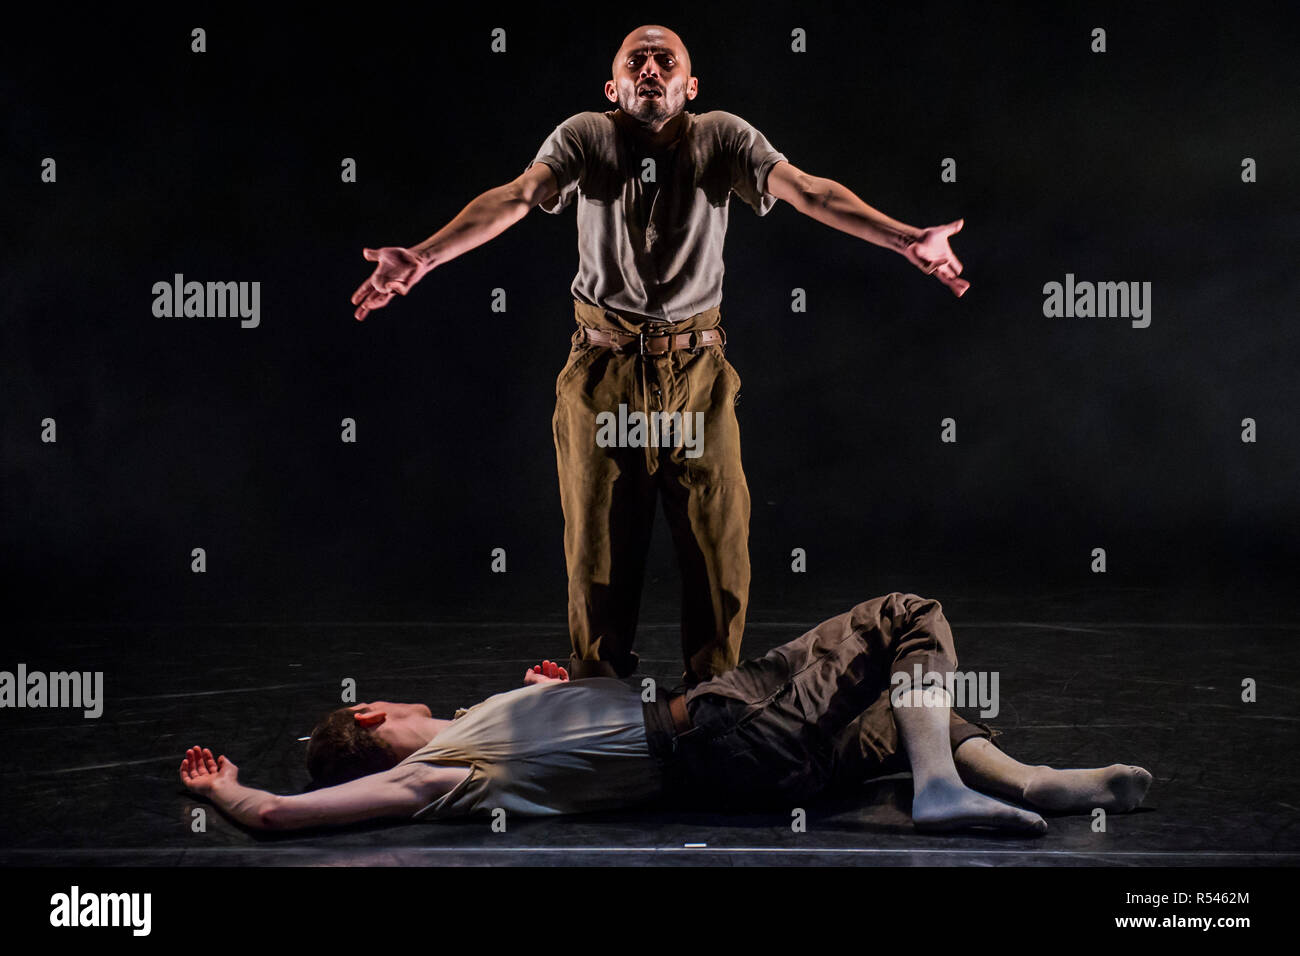 London, UK. 29th Nov 2018. Victor Callens and Mavin Khoo perform - Man to Monk: Part 1, Man by Mavin Khoo at Lilian Baylis Studio, Sadlers Wells. The Bharatanatyam dancers piece, is receiving its World Premiere. Choreographed by Carlos Pons Guerra, the production charts the journey between base human emotion, societal expectations and spiritual transcendence. Depicting the trials and tribulations experienced with emotions of raw lust, possession and rejection. Credit: Guy Bell/Alamy Live News Stock Photo